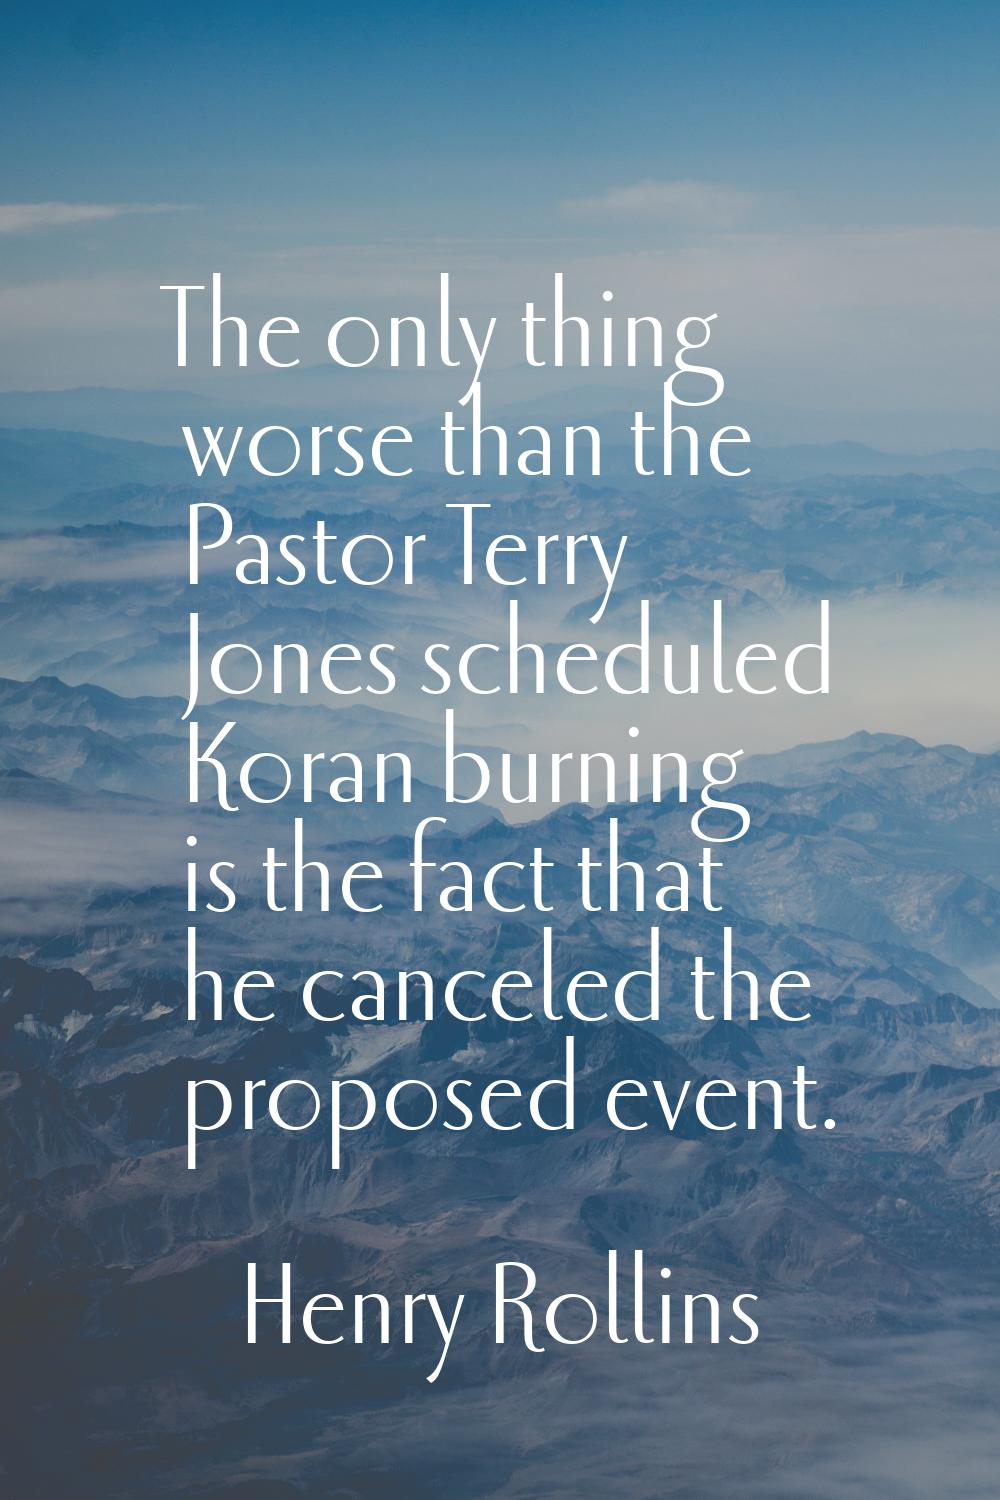 The only thing worse than the Pastor Terry Jones scheduled Koran burning is the fact that he cancel